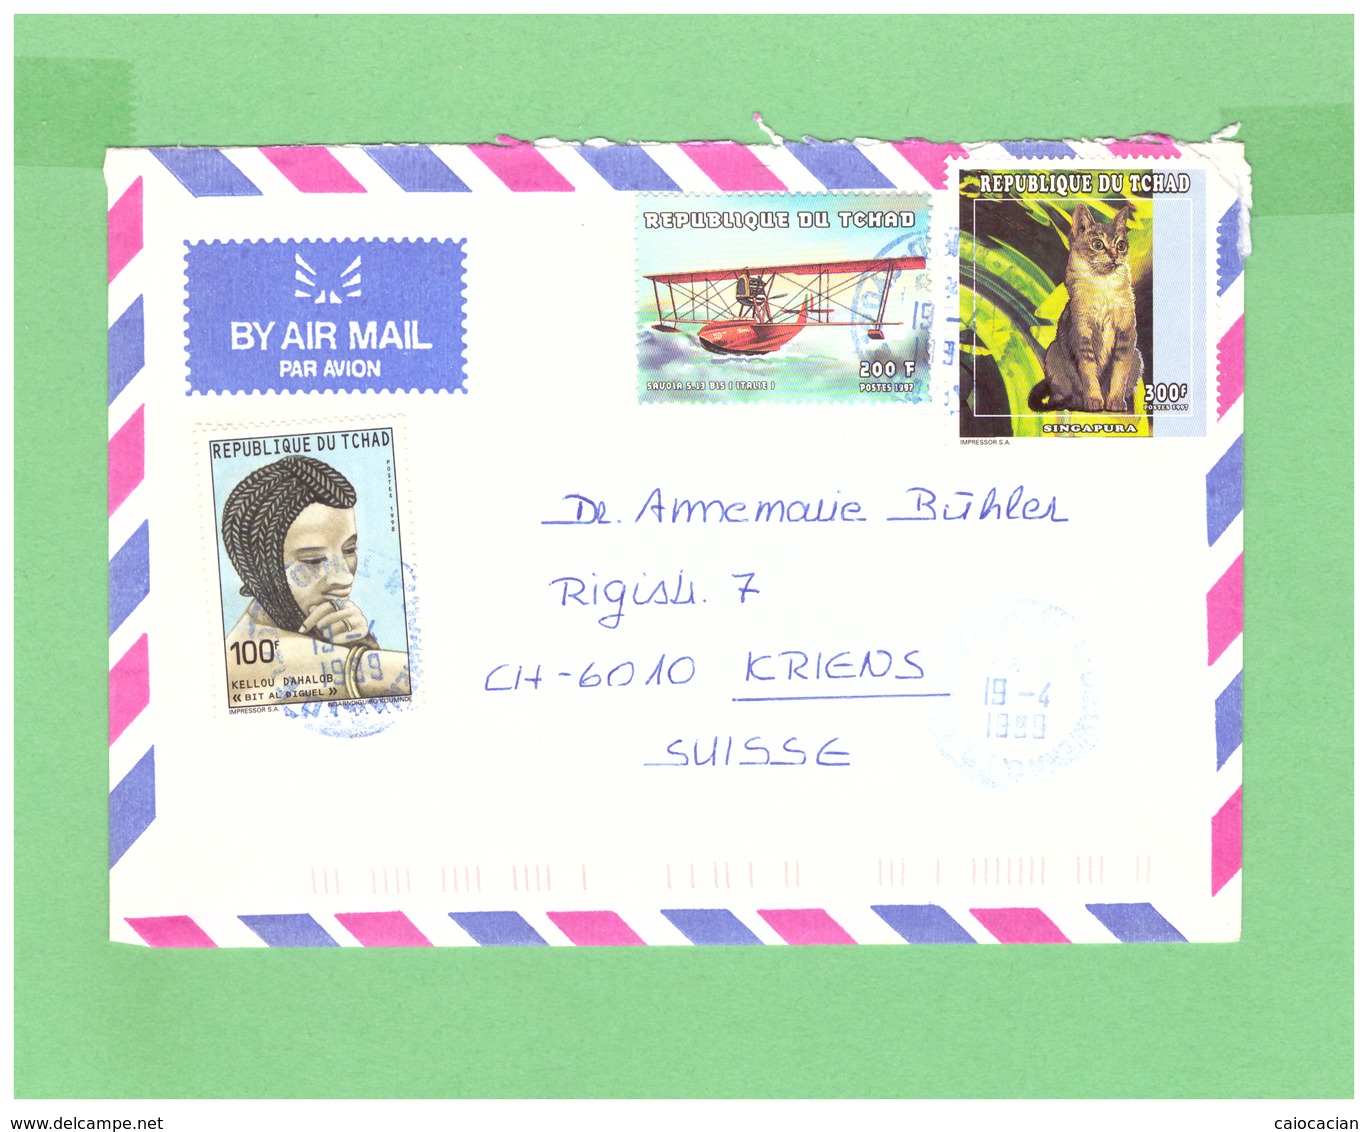 TCHAD REPUPLIQUE 1999 AIR MAIL COUVERT WITH 3 STAMPS TO SWISS - Ciad (1960-...)